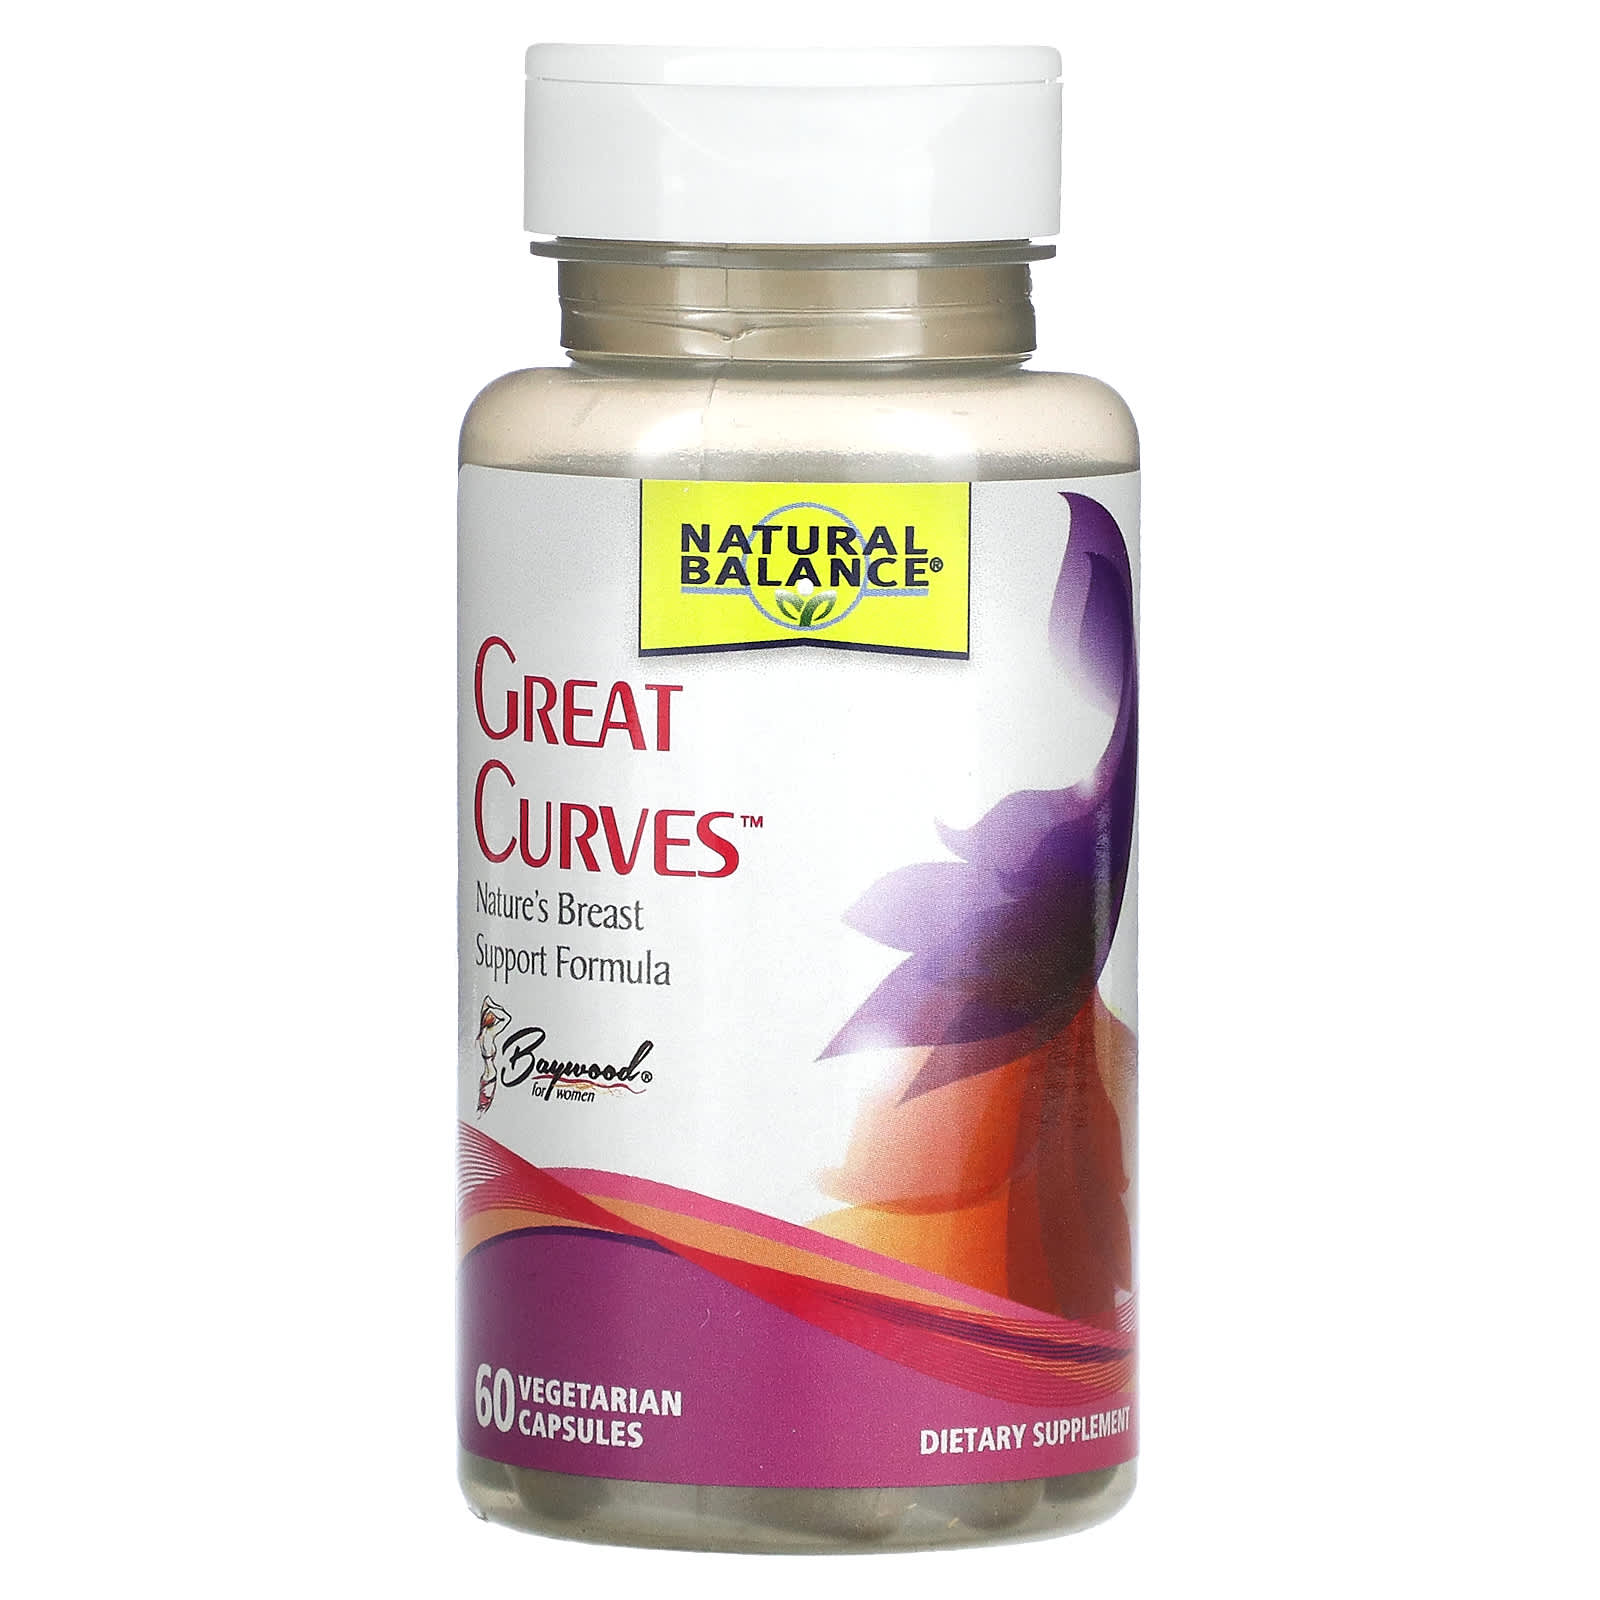 Natural balance great curves price in UAE